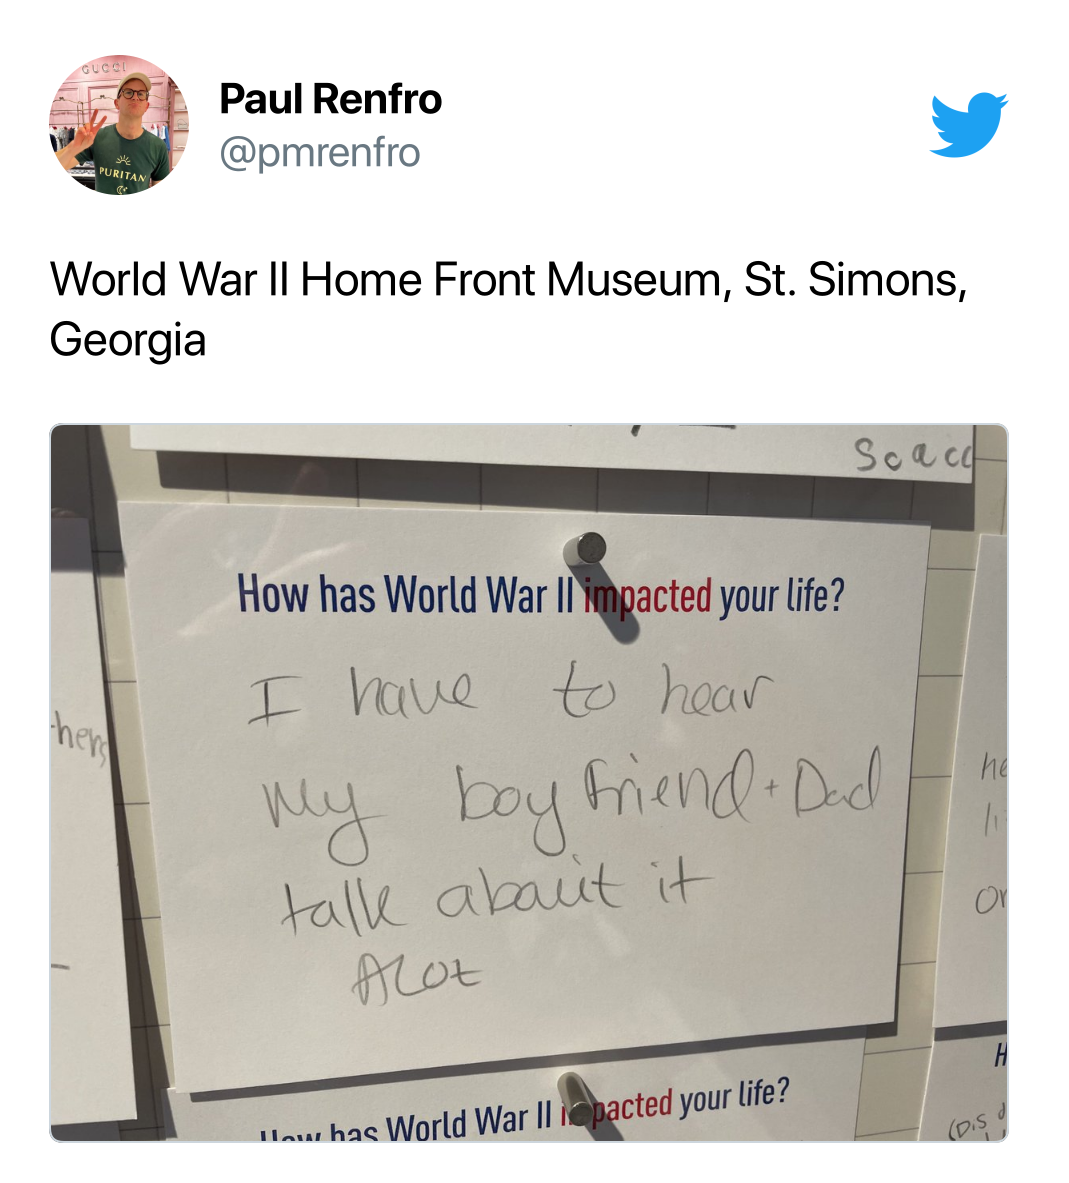 brutal comments - material - Paul Renfro World War Ii Home Front Museum, St. Simons, Georgia How has World War Ii impacted your life? I have to hear Scacc My boyfriendDad H talk about it ALOt How has World War Ii pacted your life? Or